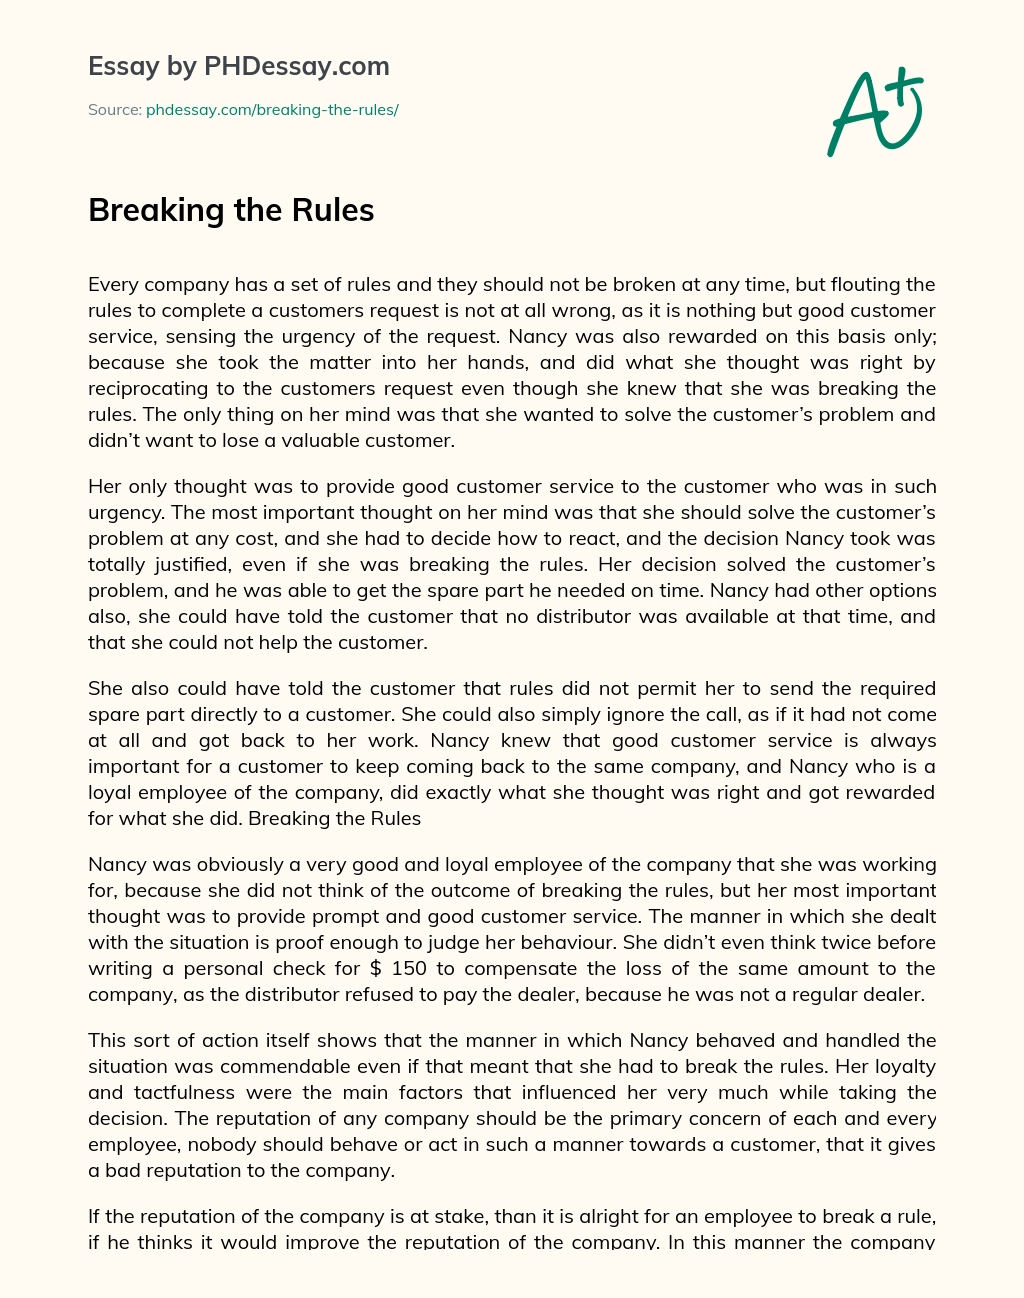 Breaking the Rules essay